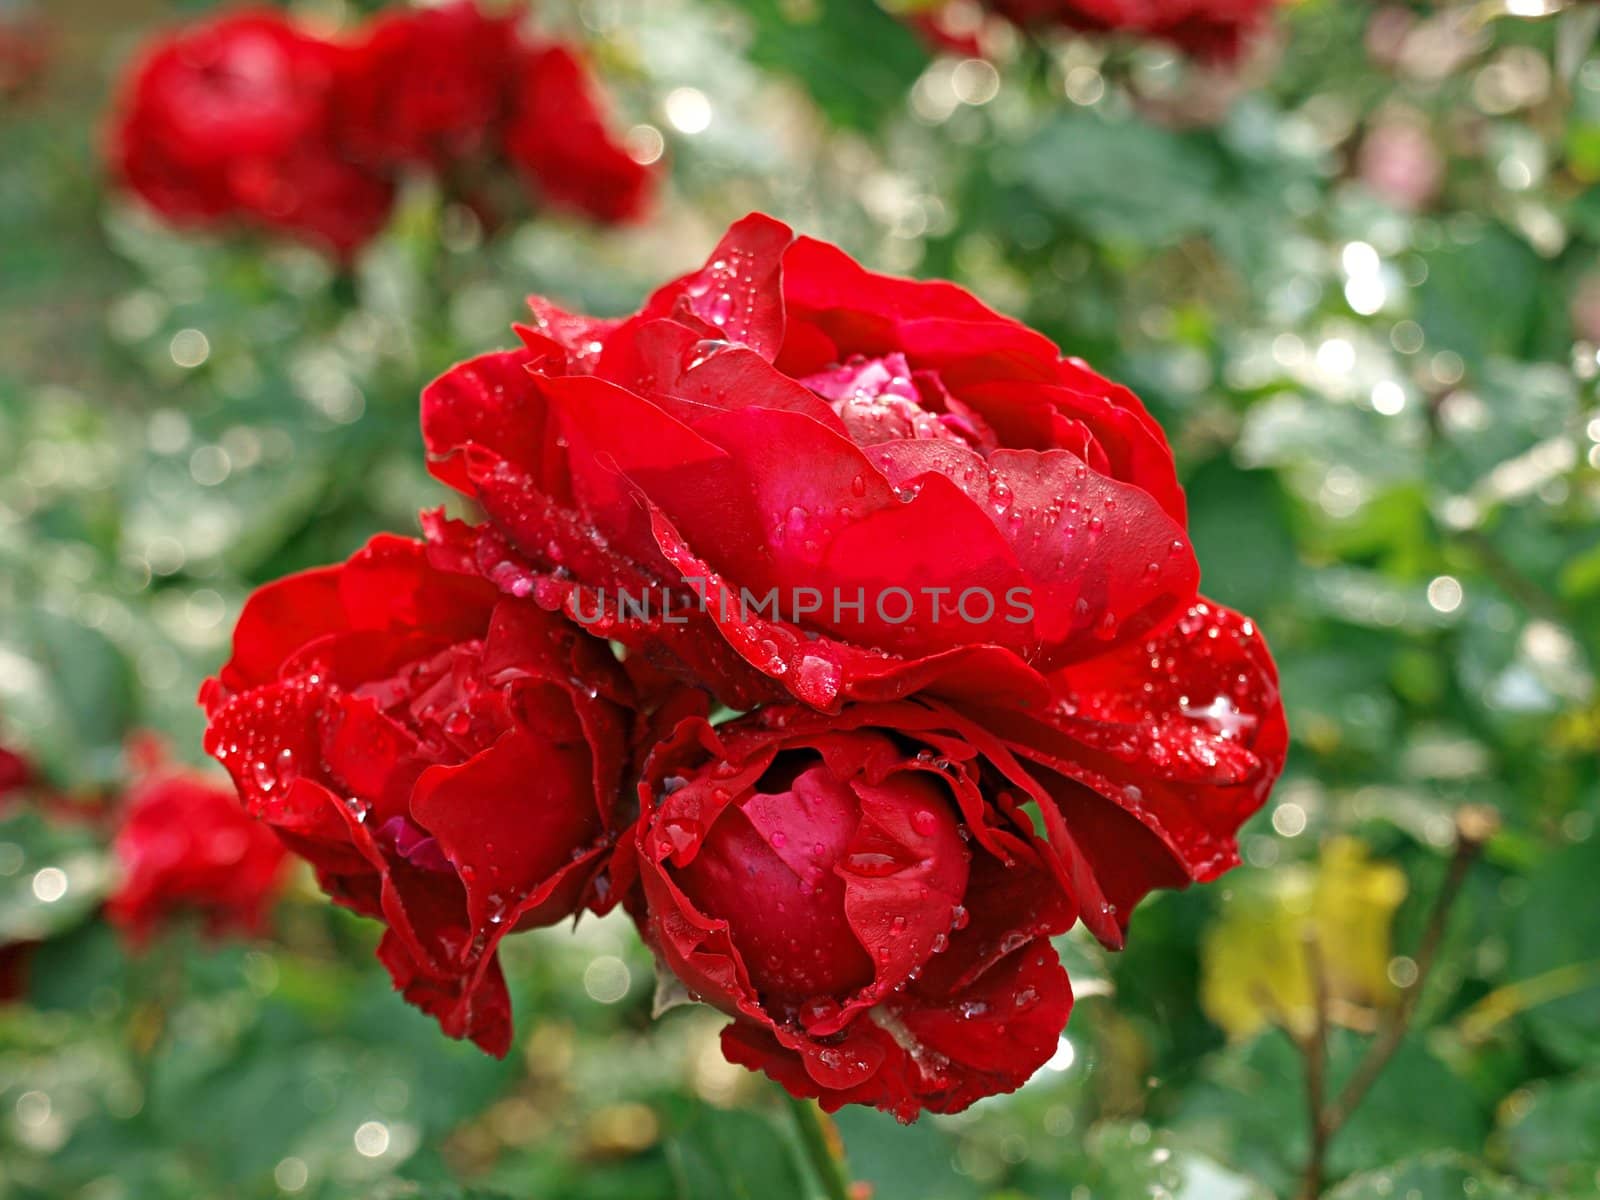 Blooming red rose with water droplets in close up 